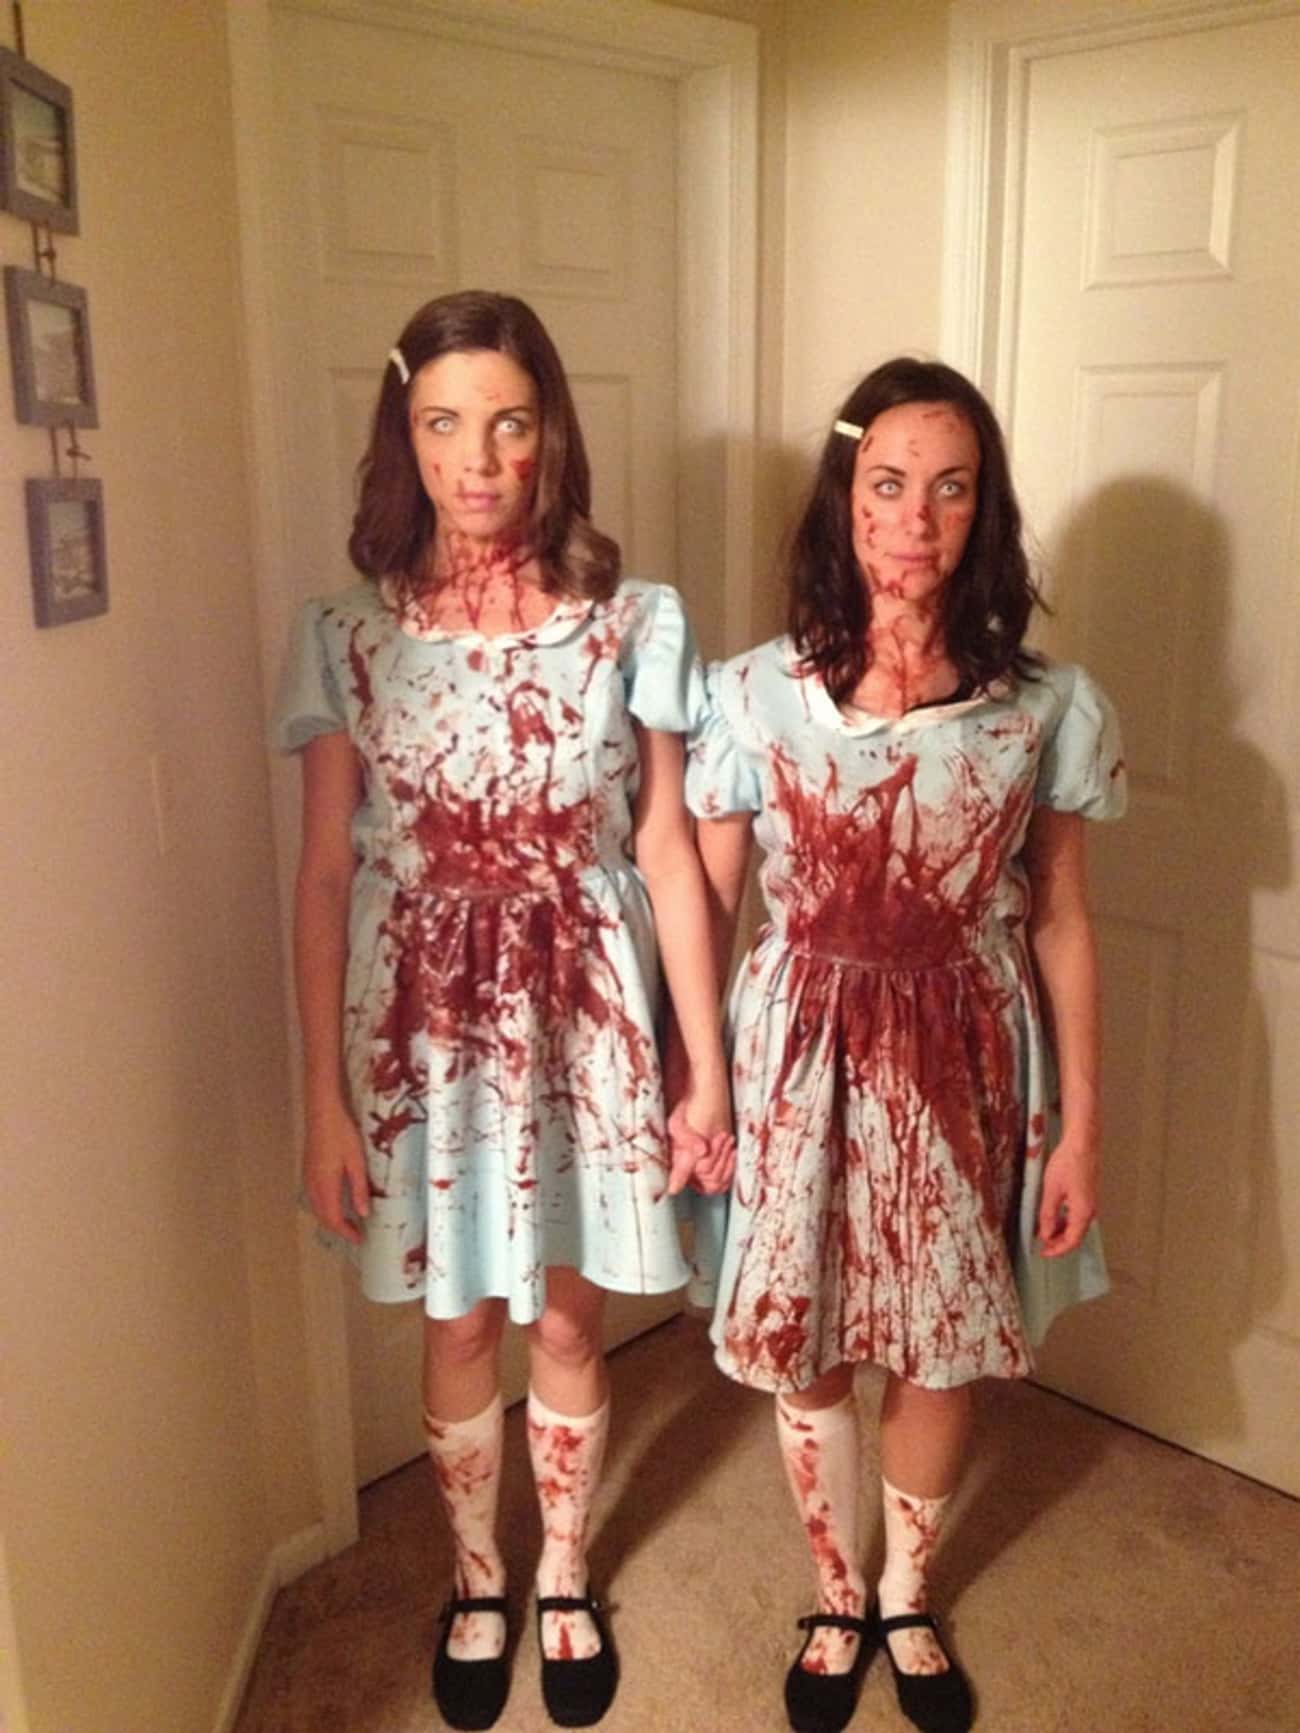 The Grady Sisters